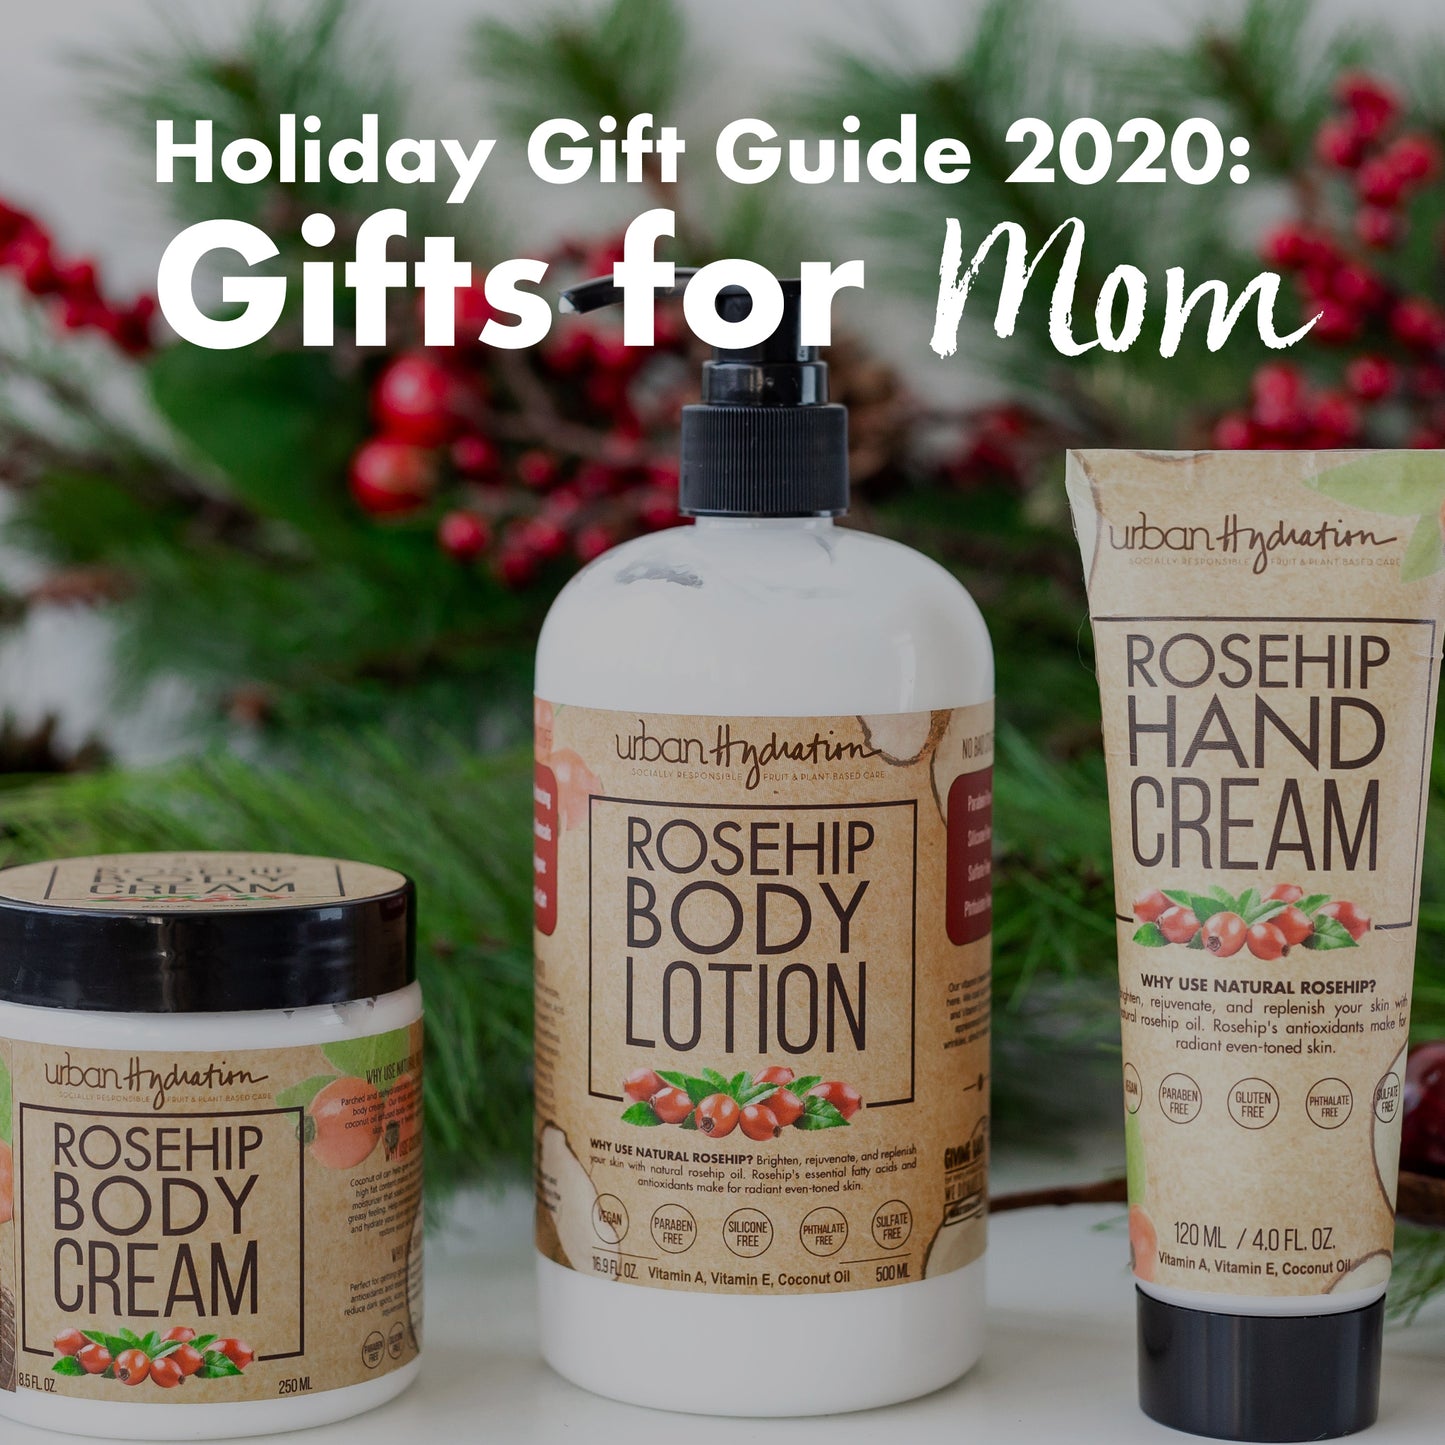 Holiday Gift Guide 2020: Gifts for Mom.